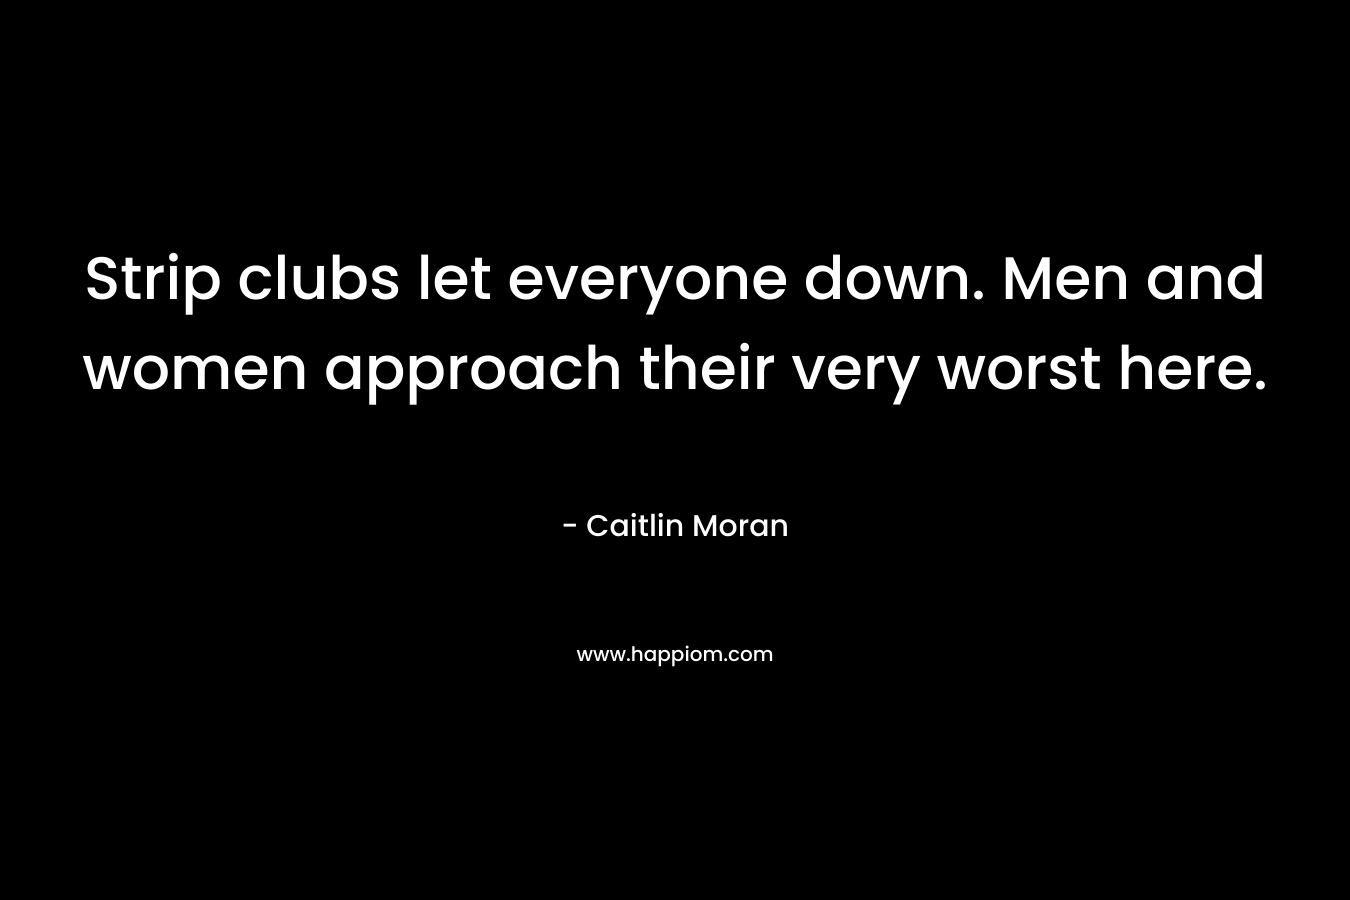 Strip clubs let everyone down. Men and women approach their very worst here. – Caitlin Moran